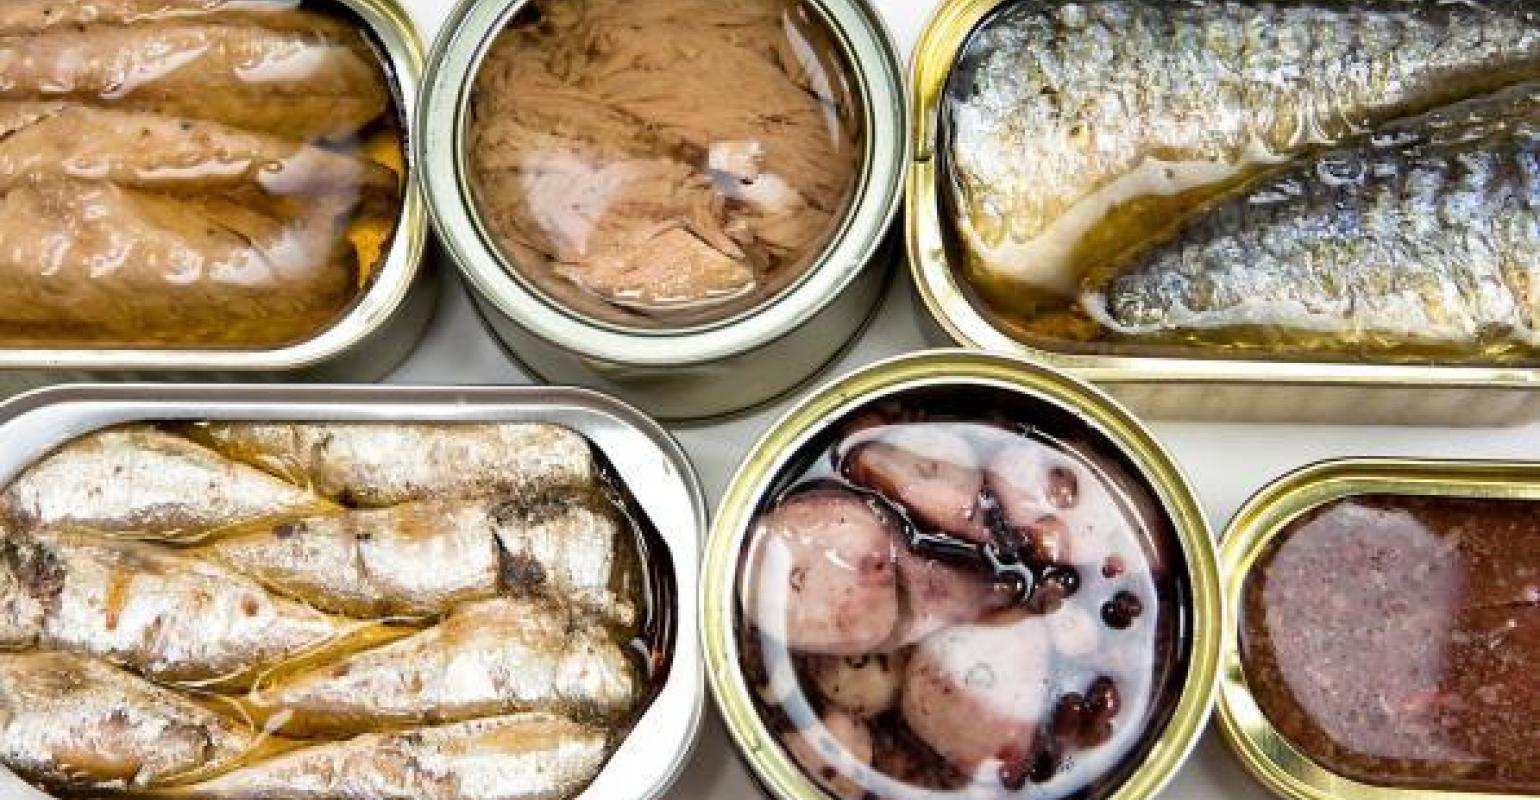 Tinned fish finds favor among foodies in restaurants | Restaurant Hospitality